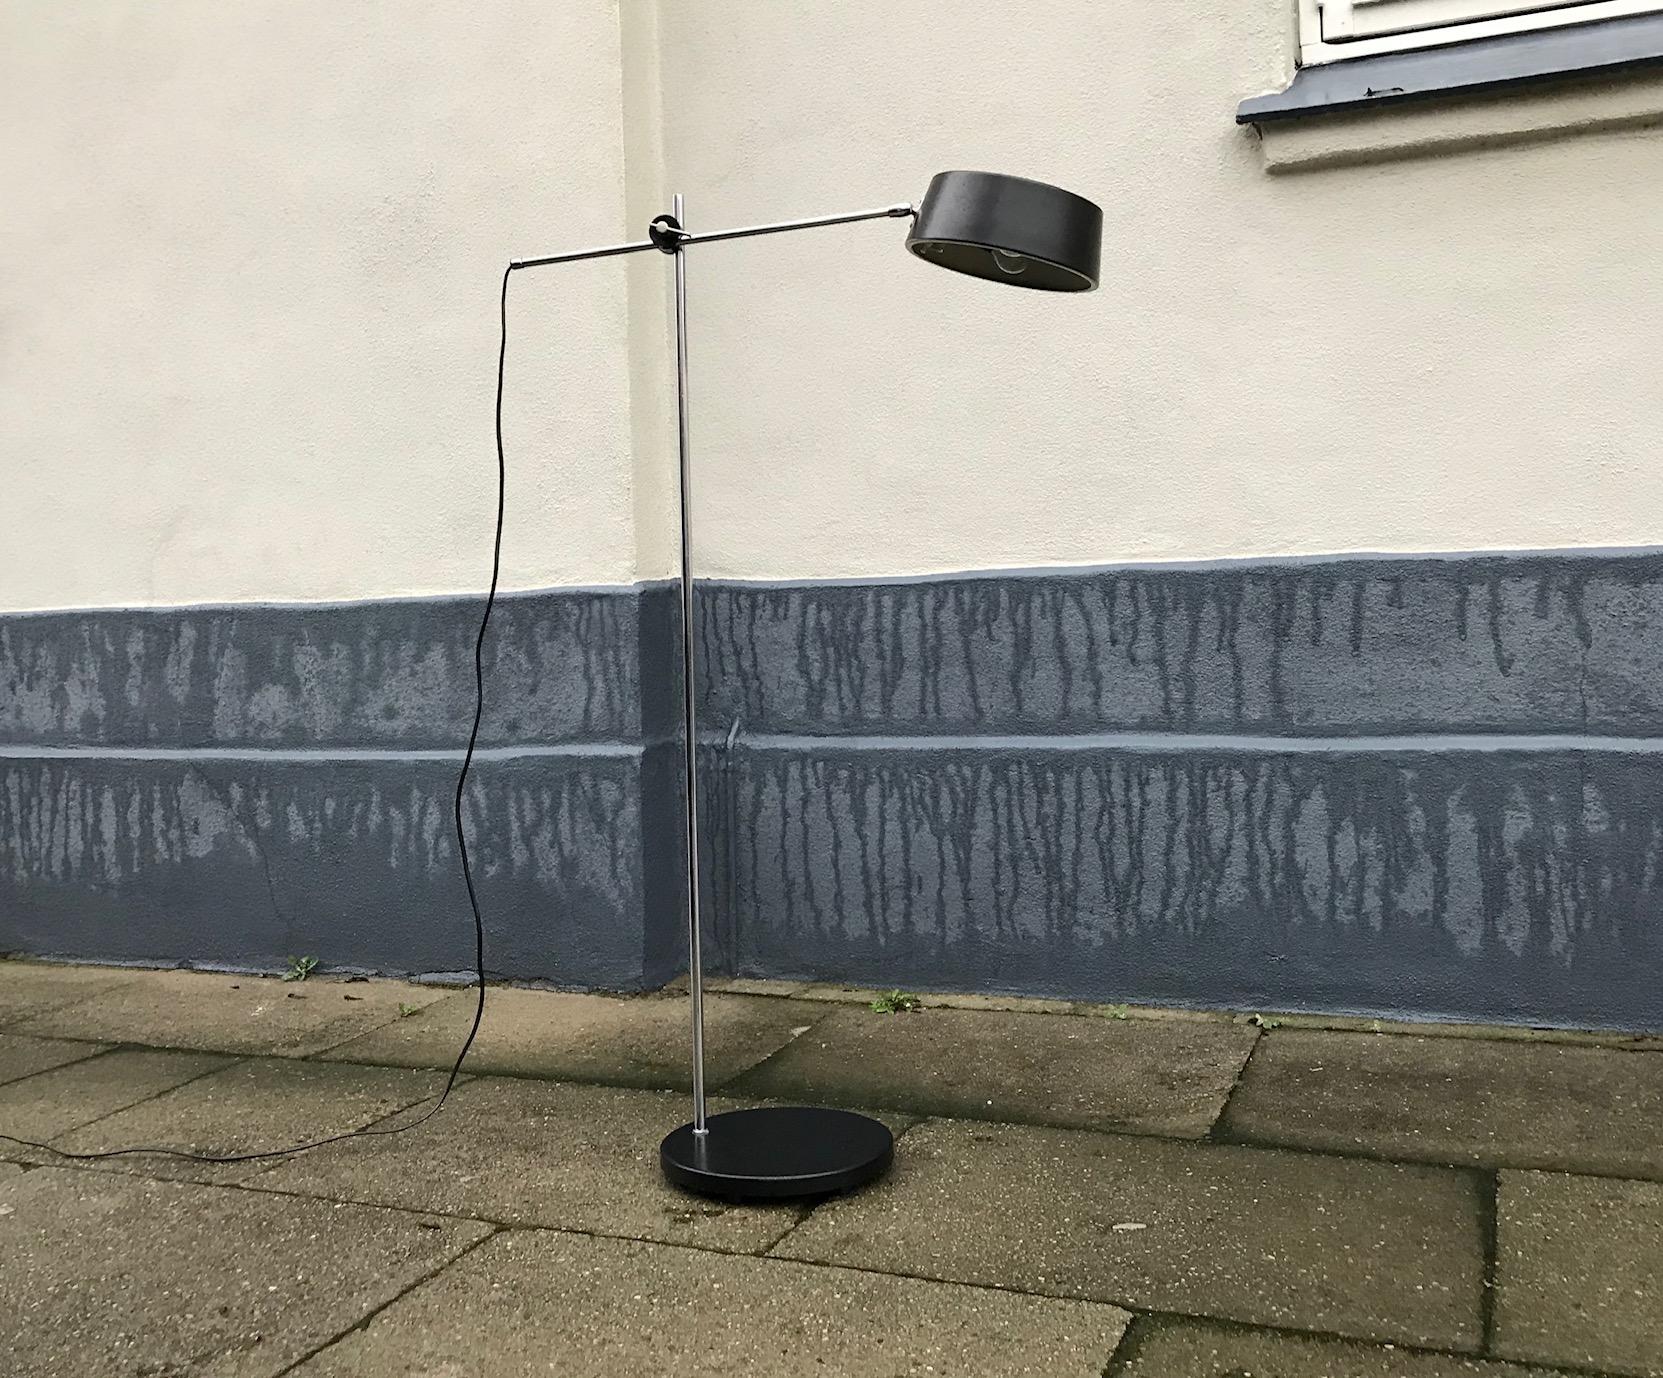 Rare waterpump shaped floor lamp from Holm-Sørensen. It has two light sources, hidden on/off switch and a fully adjustable extended 'arm'/shade holder. The height is adjustable up to circa 155 cm when extended fully.
It is fashioned out of chromed